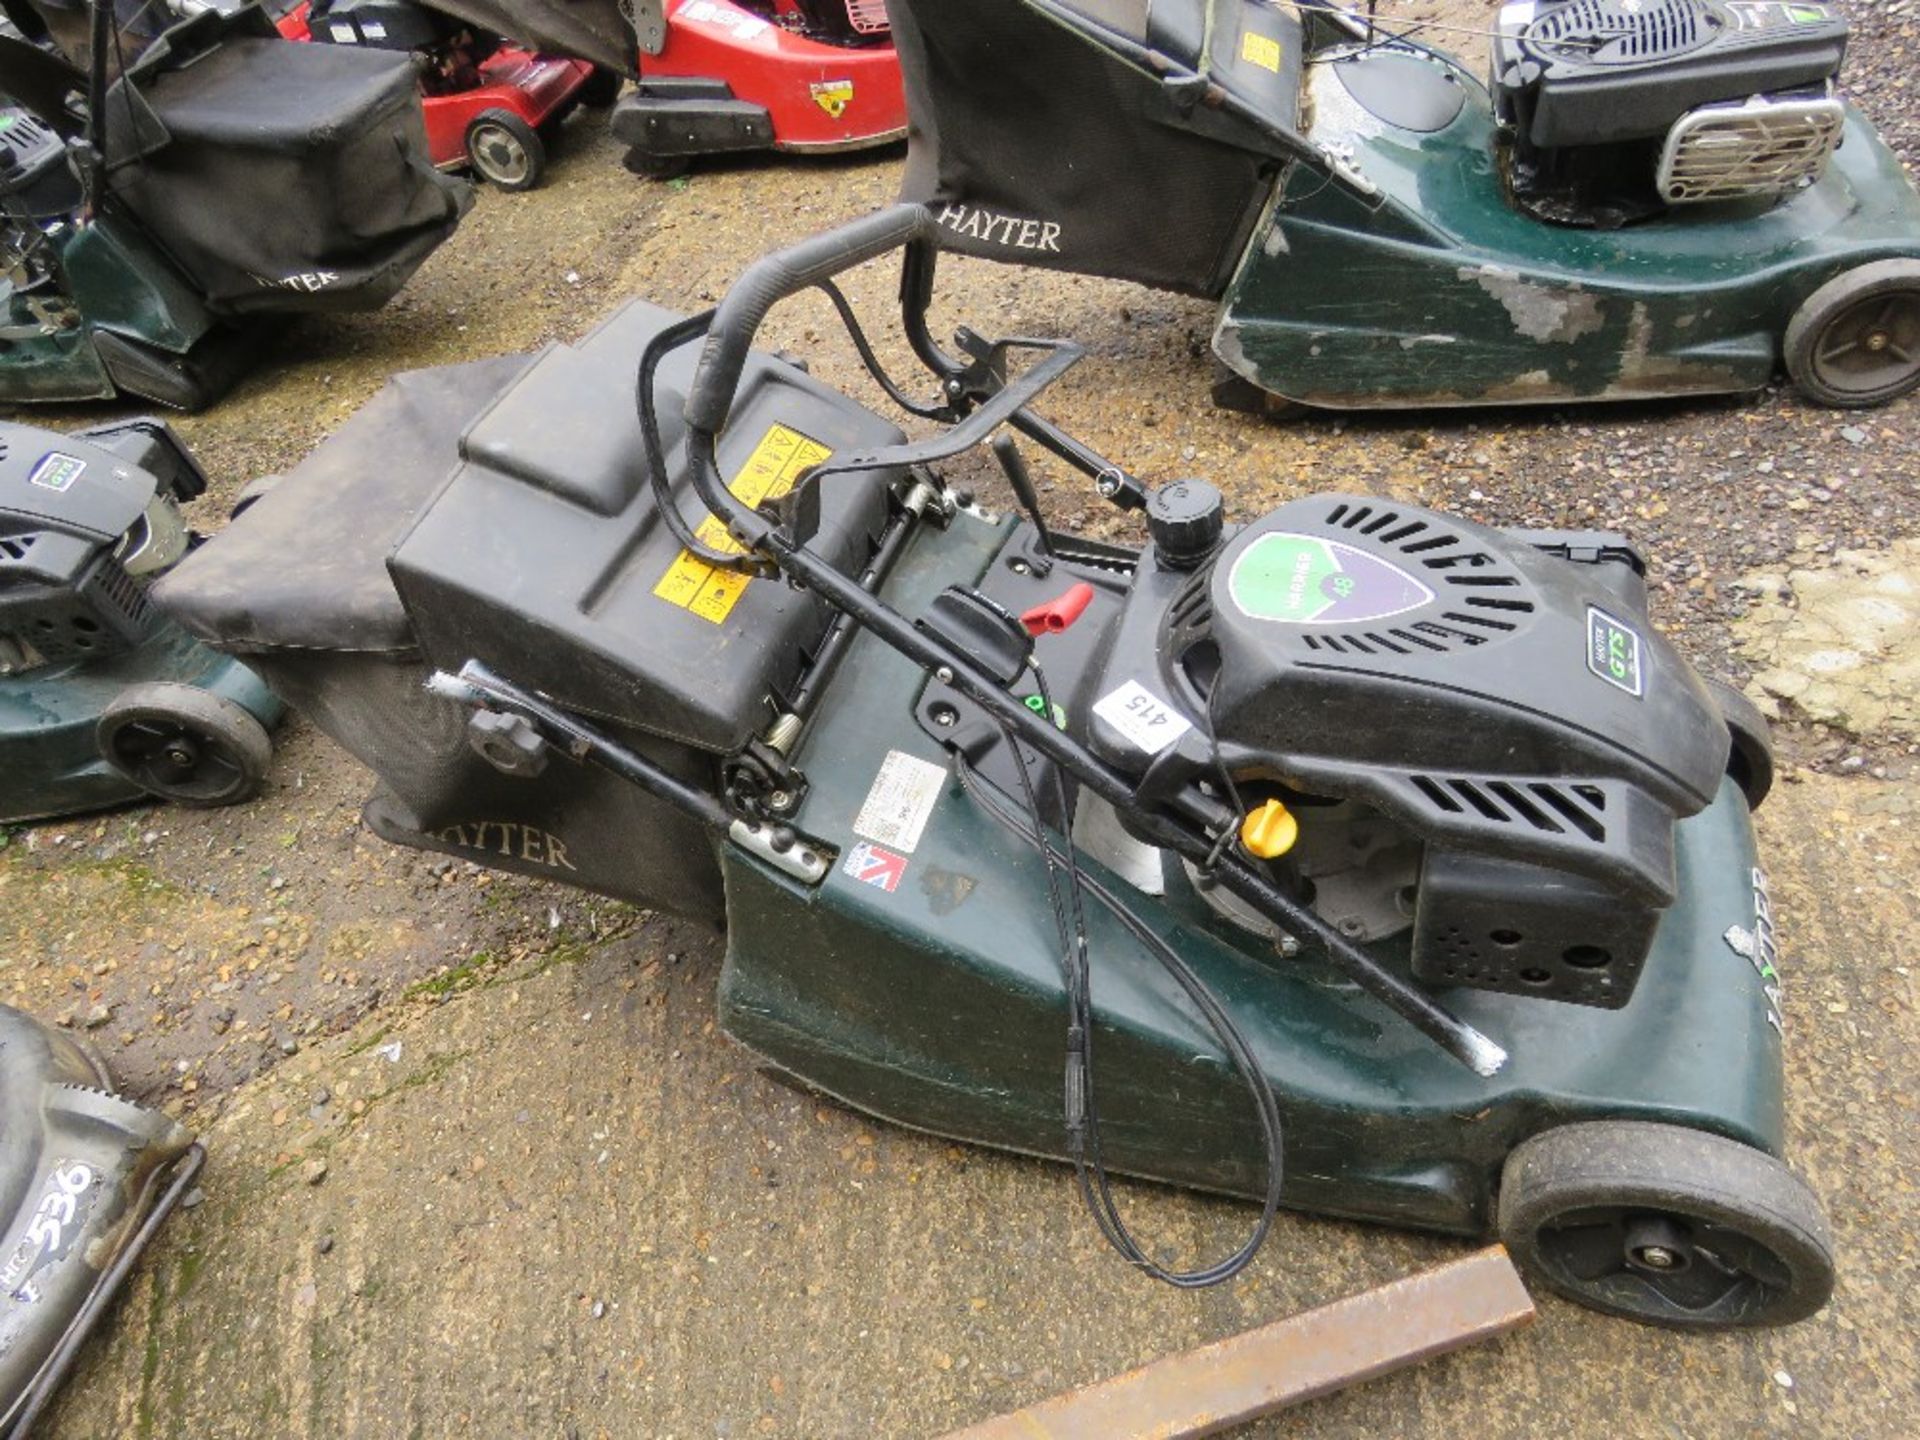 HAYTER HARRIER 48 ROLLER MOWER WITH COLLECTOR . DIRECT FROM LOCAL LANDSCAPE COMPANY WHO ARE CLOSING